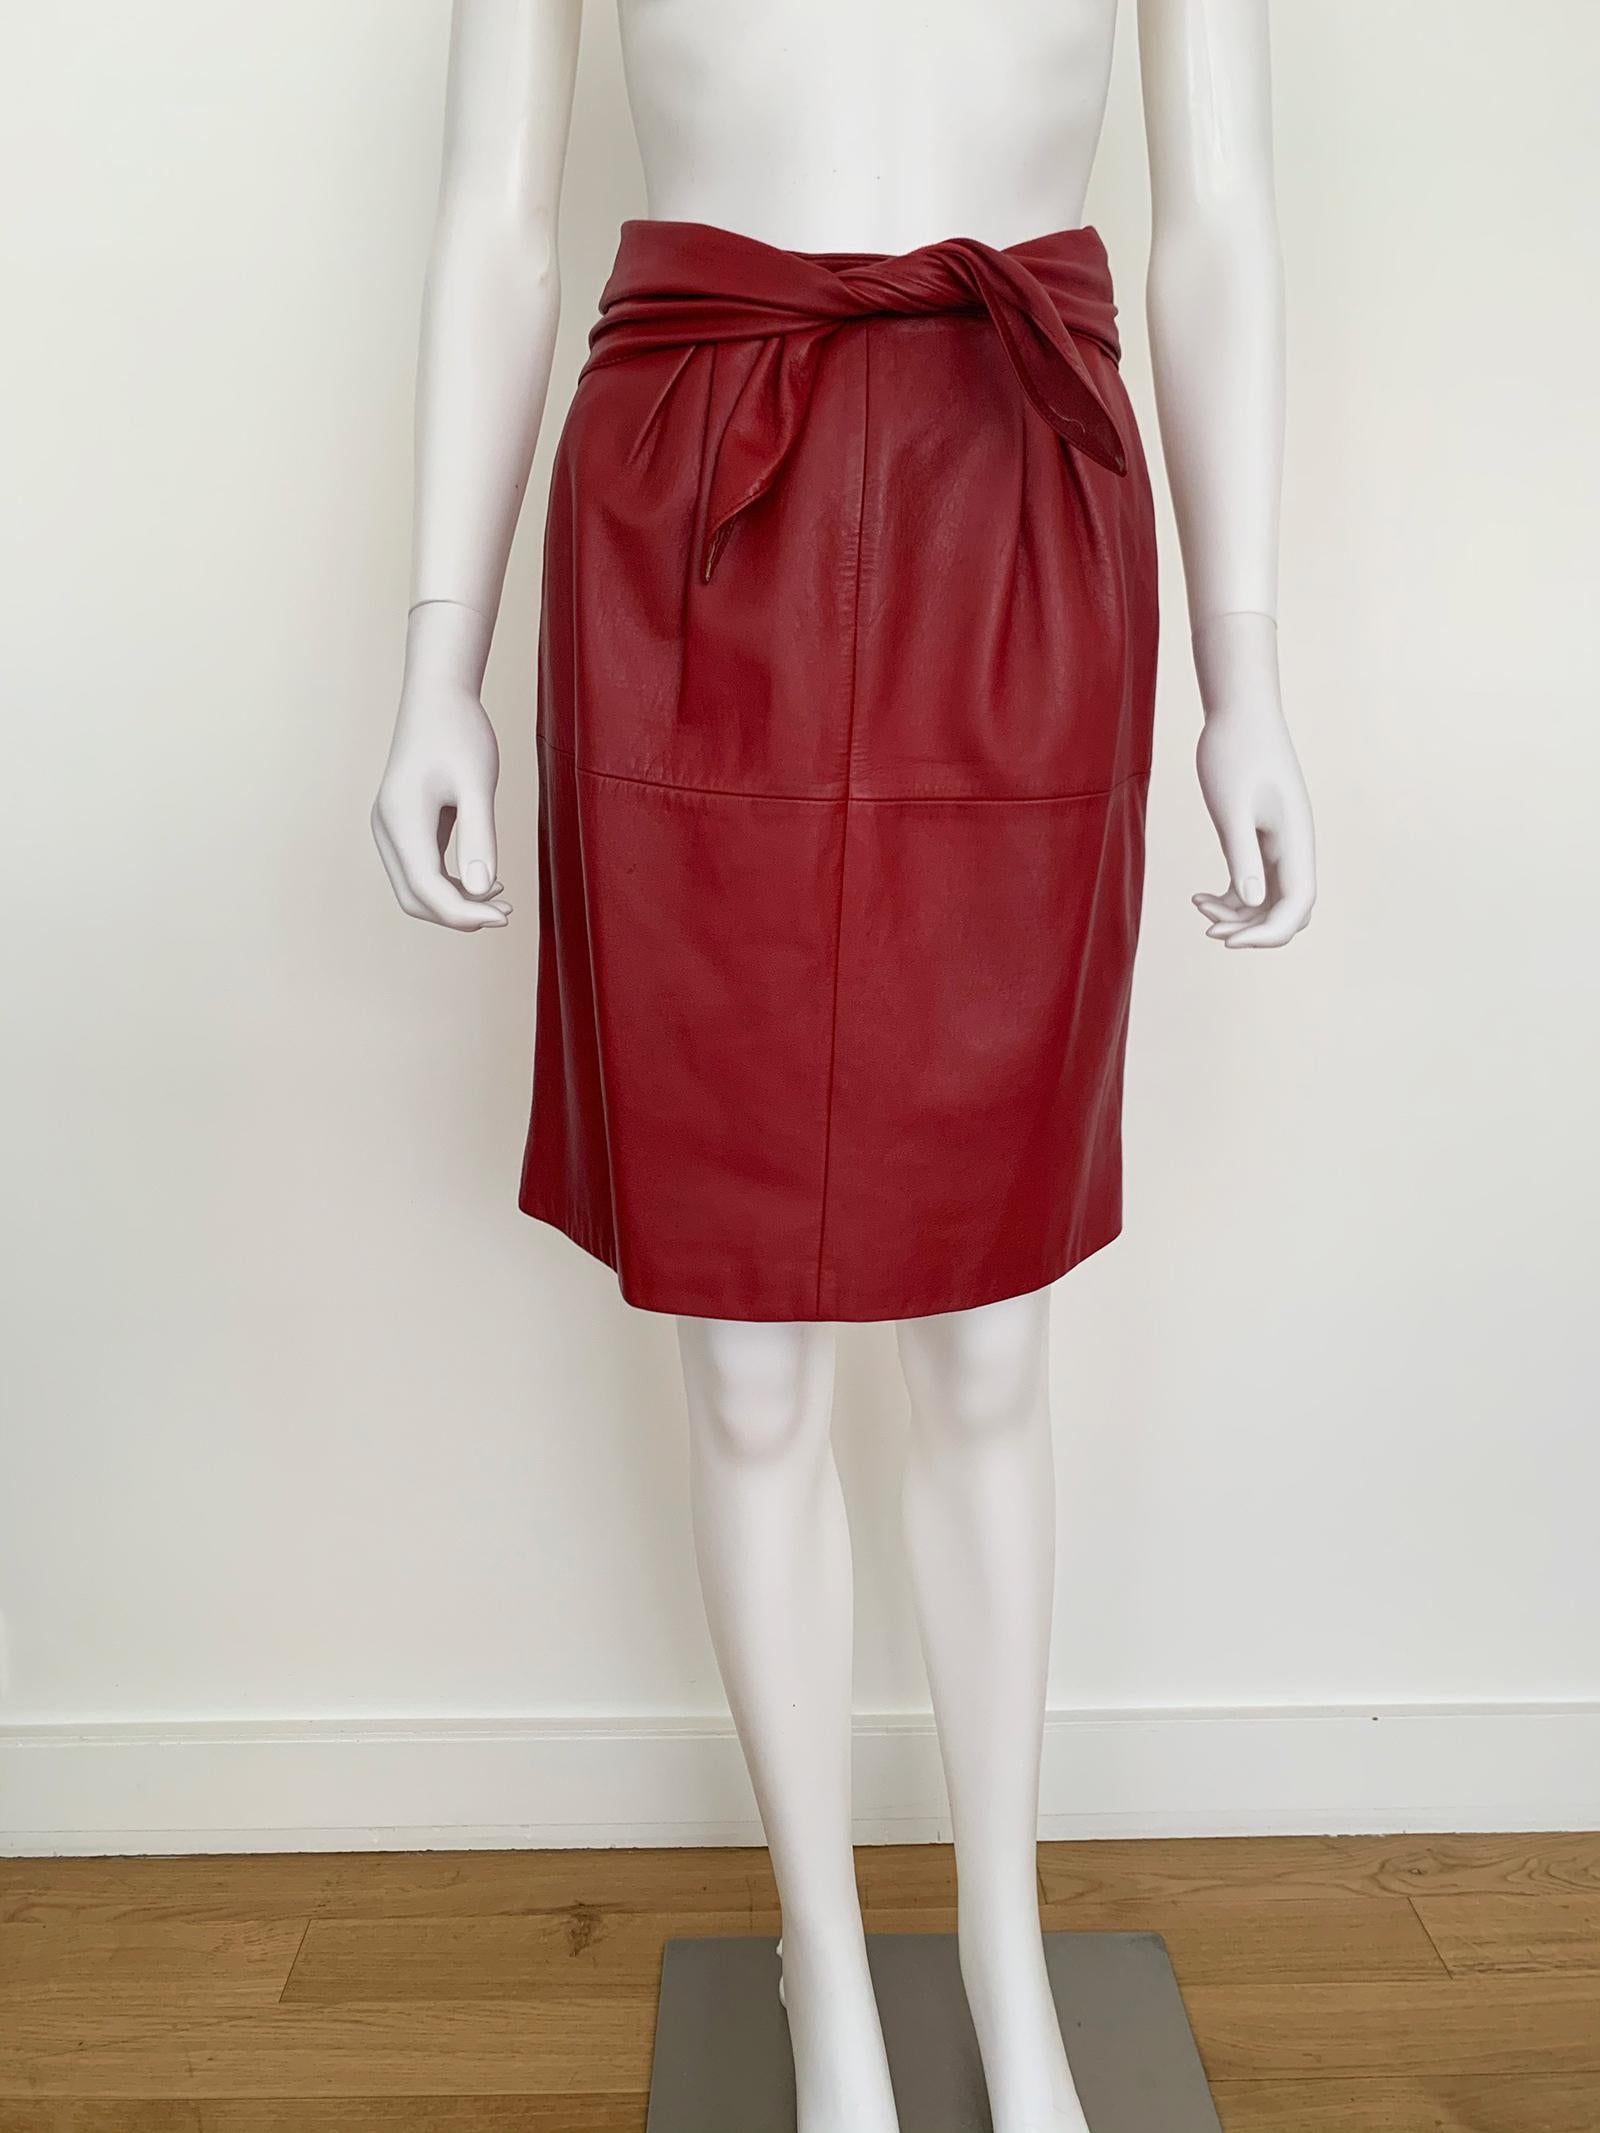 Vintage Valentino Leather Pencil Skirt 
- Pencil Skirt 
- Color Red 
- Belt 
- Flattering Fitting 
- Size 36
- Perfect Condition 